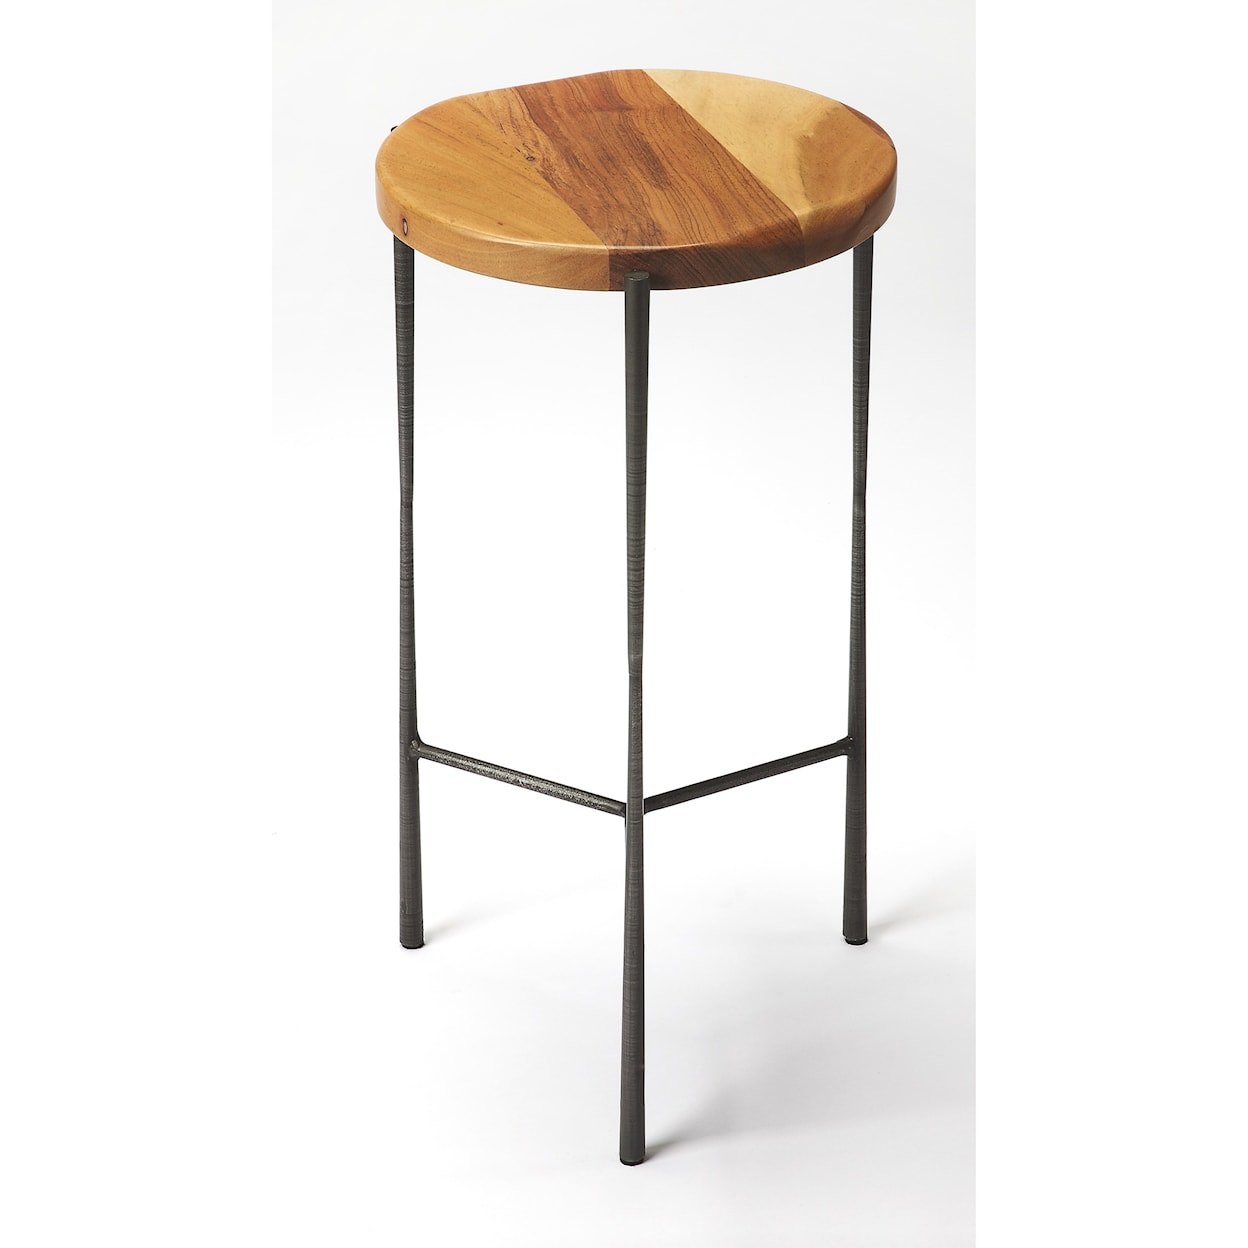 Butler Specialty Company Industrial Chic Accent Table